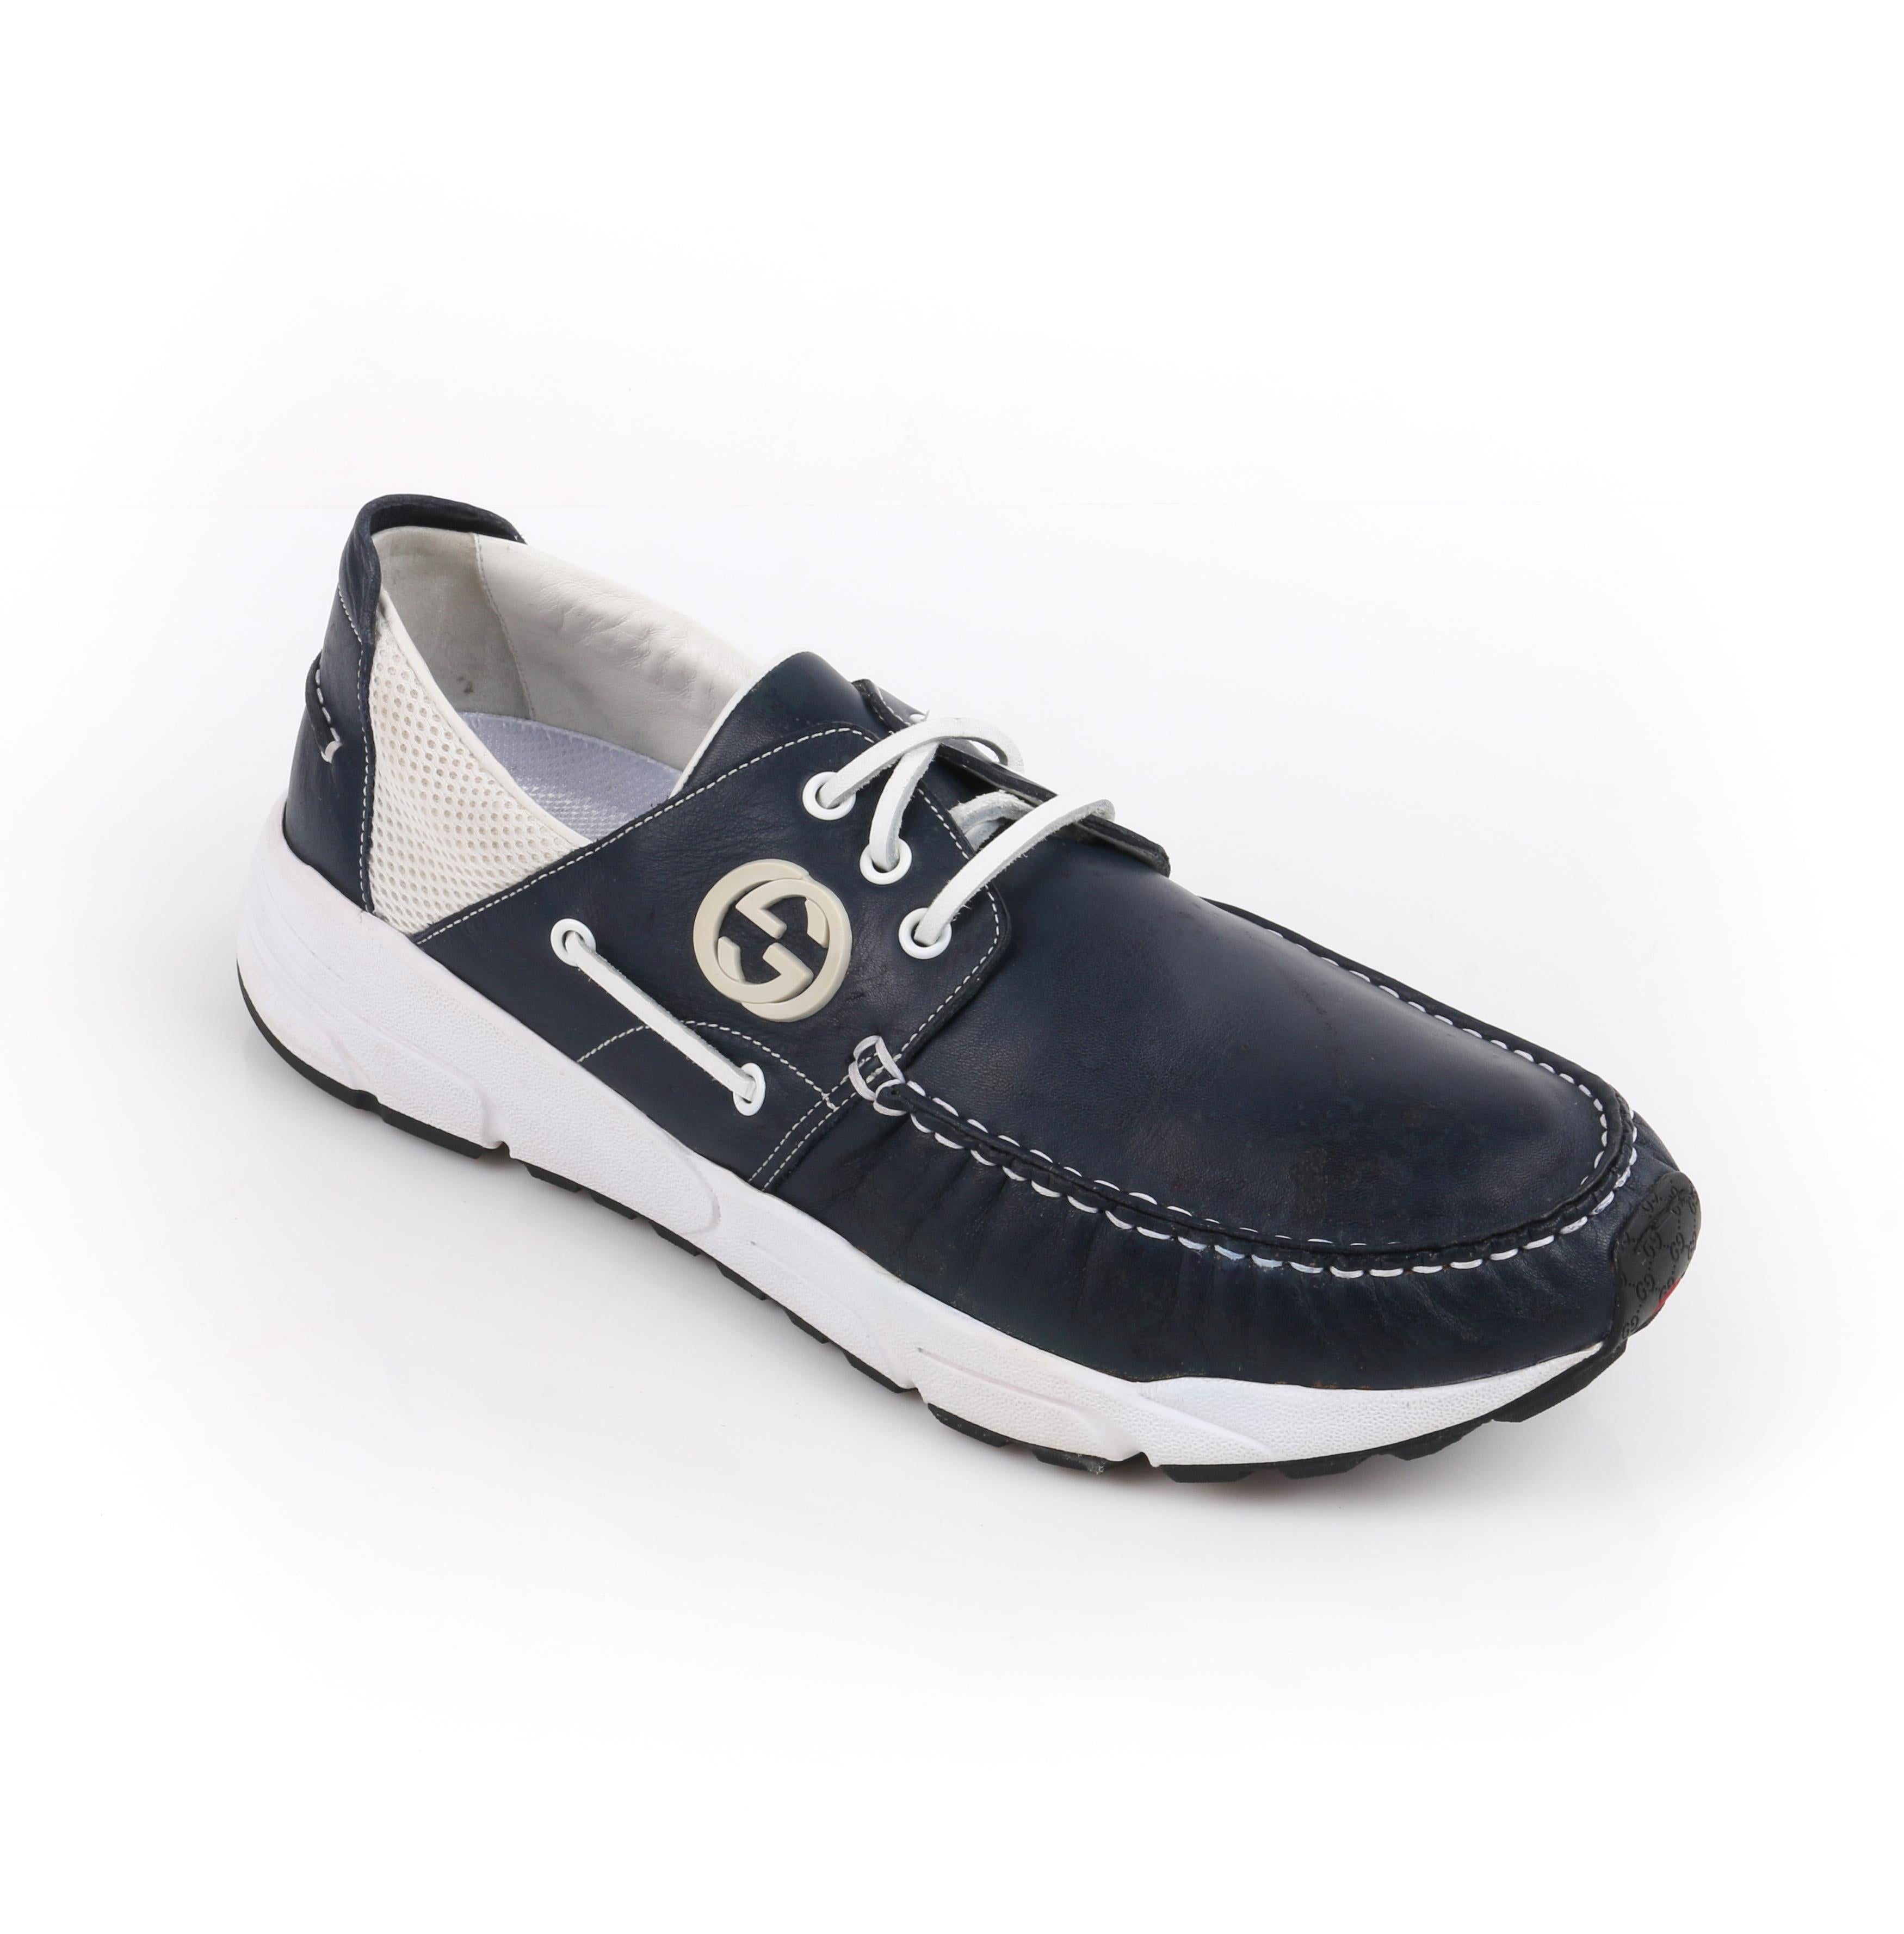 GUCCI Men's Leather Rubber Sole Lace Up Low Top Athletic Boat Shoes 
 
Brand / Manufacturer: Gucci
Style: Men's boat shoes 
Color(s): Shades of white, red, black, and blue
Unmarked Materials (feel of): Upper, laces: leather; lining: leather; sole,